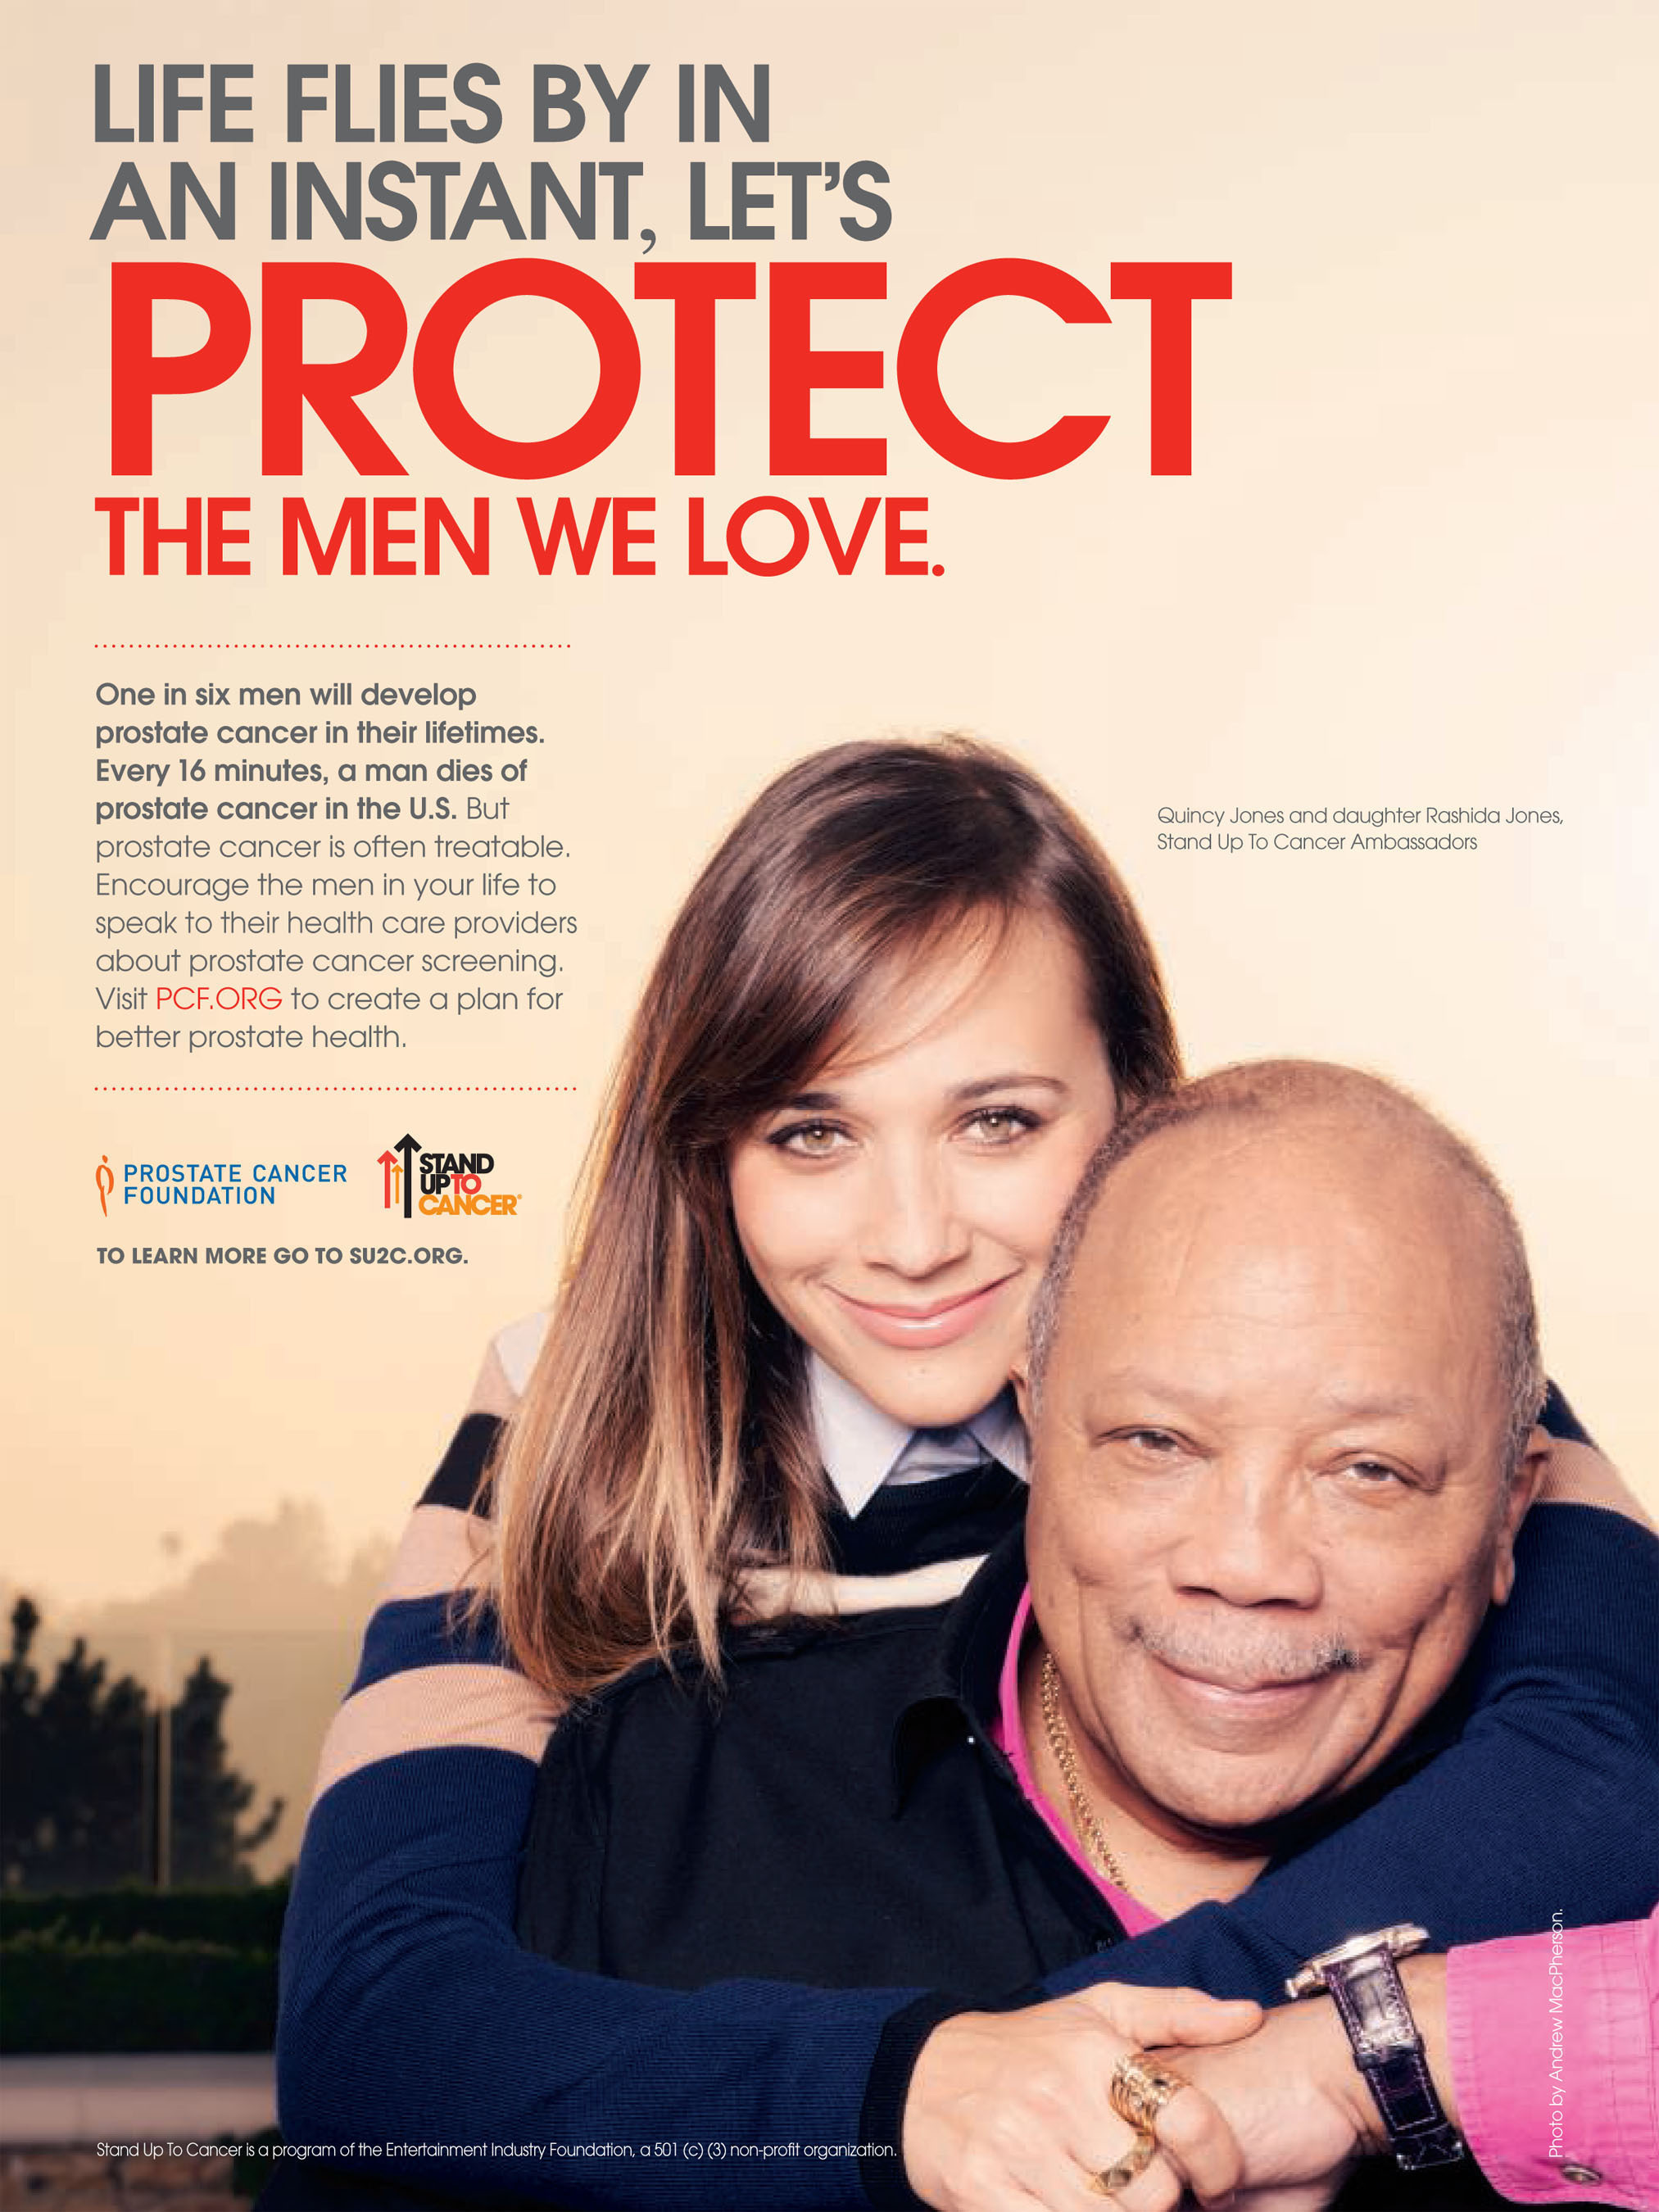 Quincy and Rashida Jones in the new PSA with The Prostate Cancer Foundation (PCF) and Stand Up To Cancer (SU2C). (PRNewsFoto/The Prostate Cancer Foundation and Stand Up To Cancer) (PRNewsFoto/THE PROSTATE CANCER FOUNDATION)